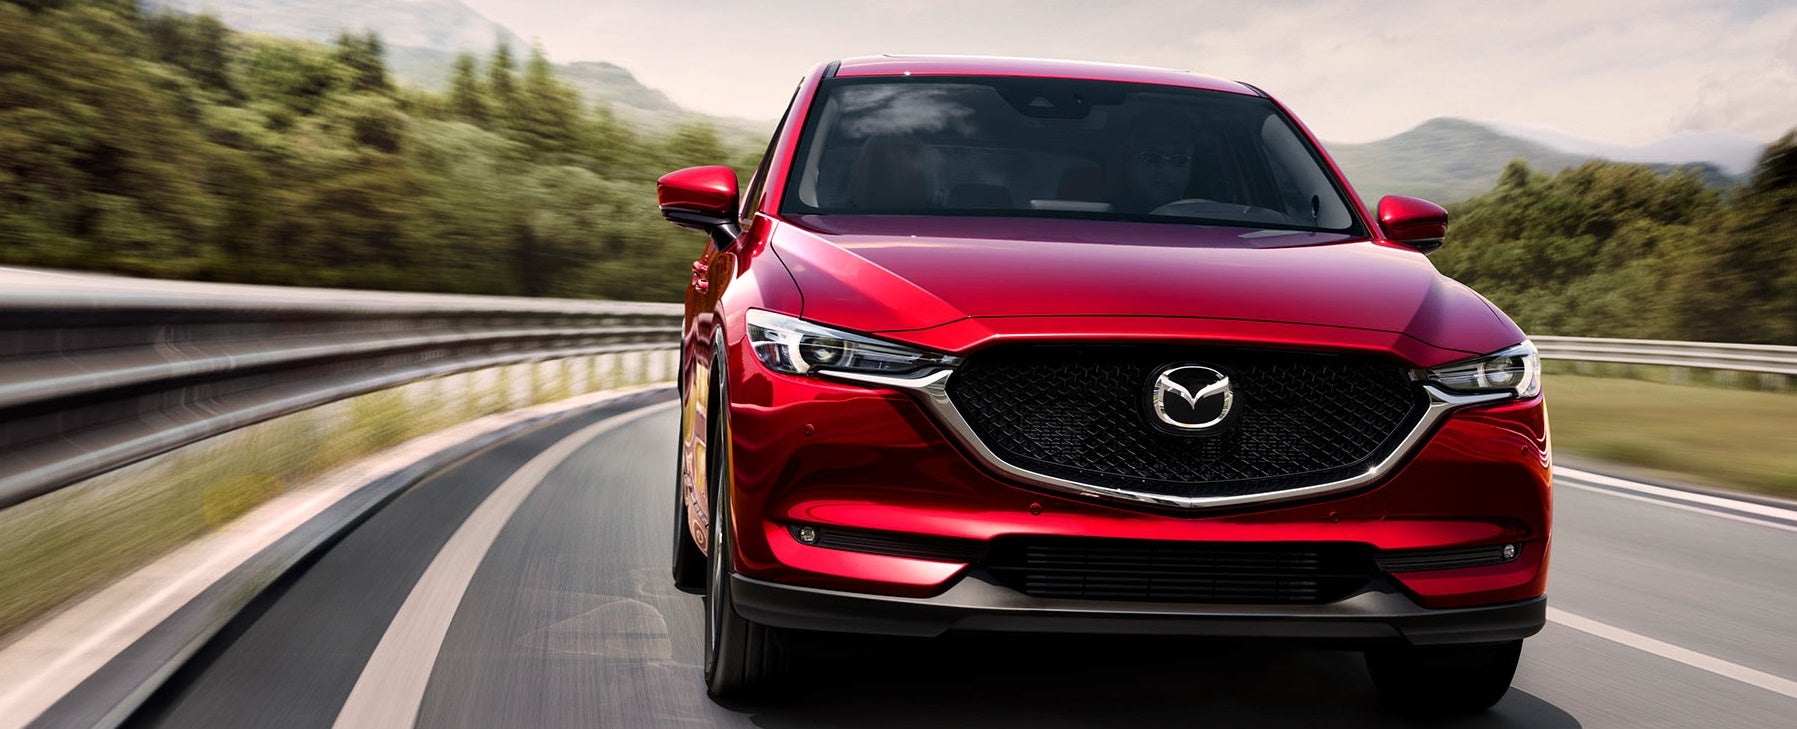 A 2019 Mazda CX-5 parked